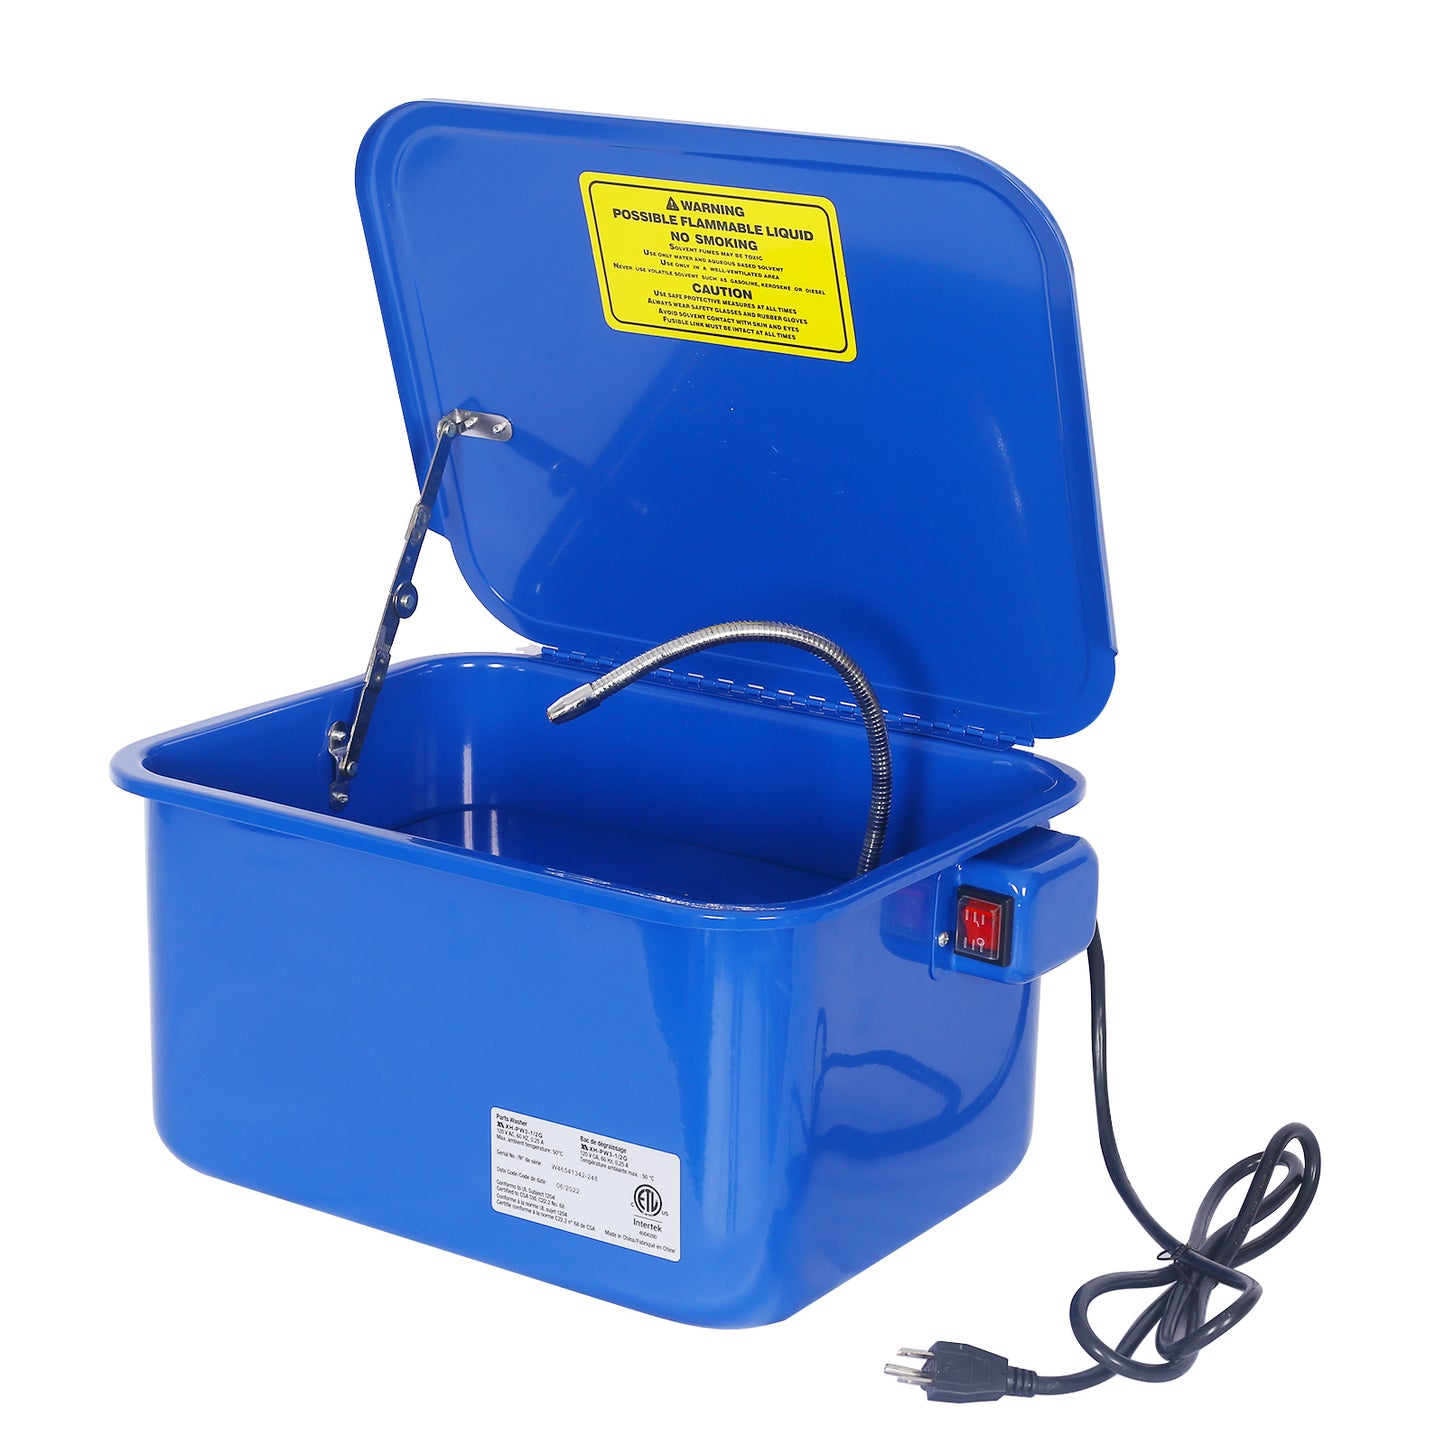 Cabinet parts washer with 110v pump,3.5 gallon BENCHTOP PARTS WASHER ,AUTOMOTIVE PARTS WASHER ELECTRICAL PUMP